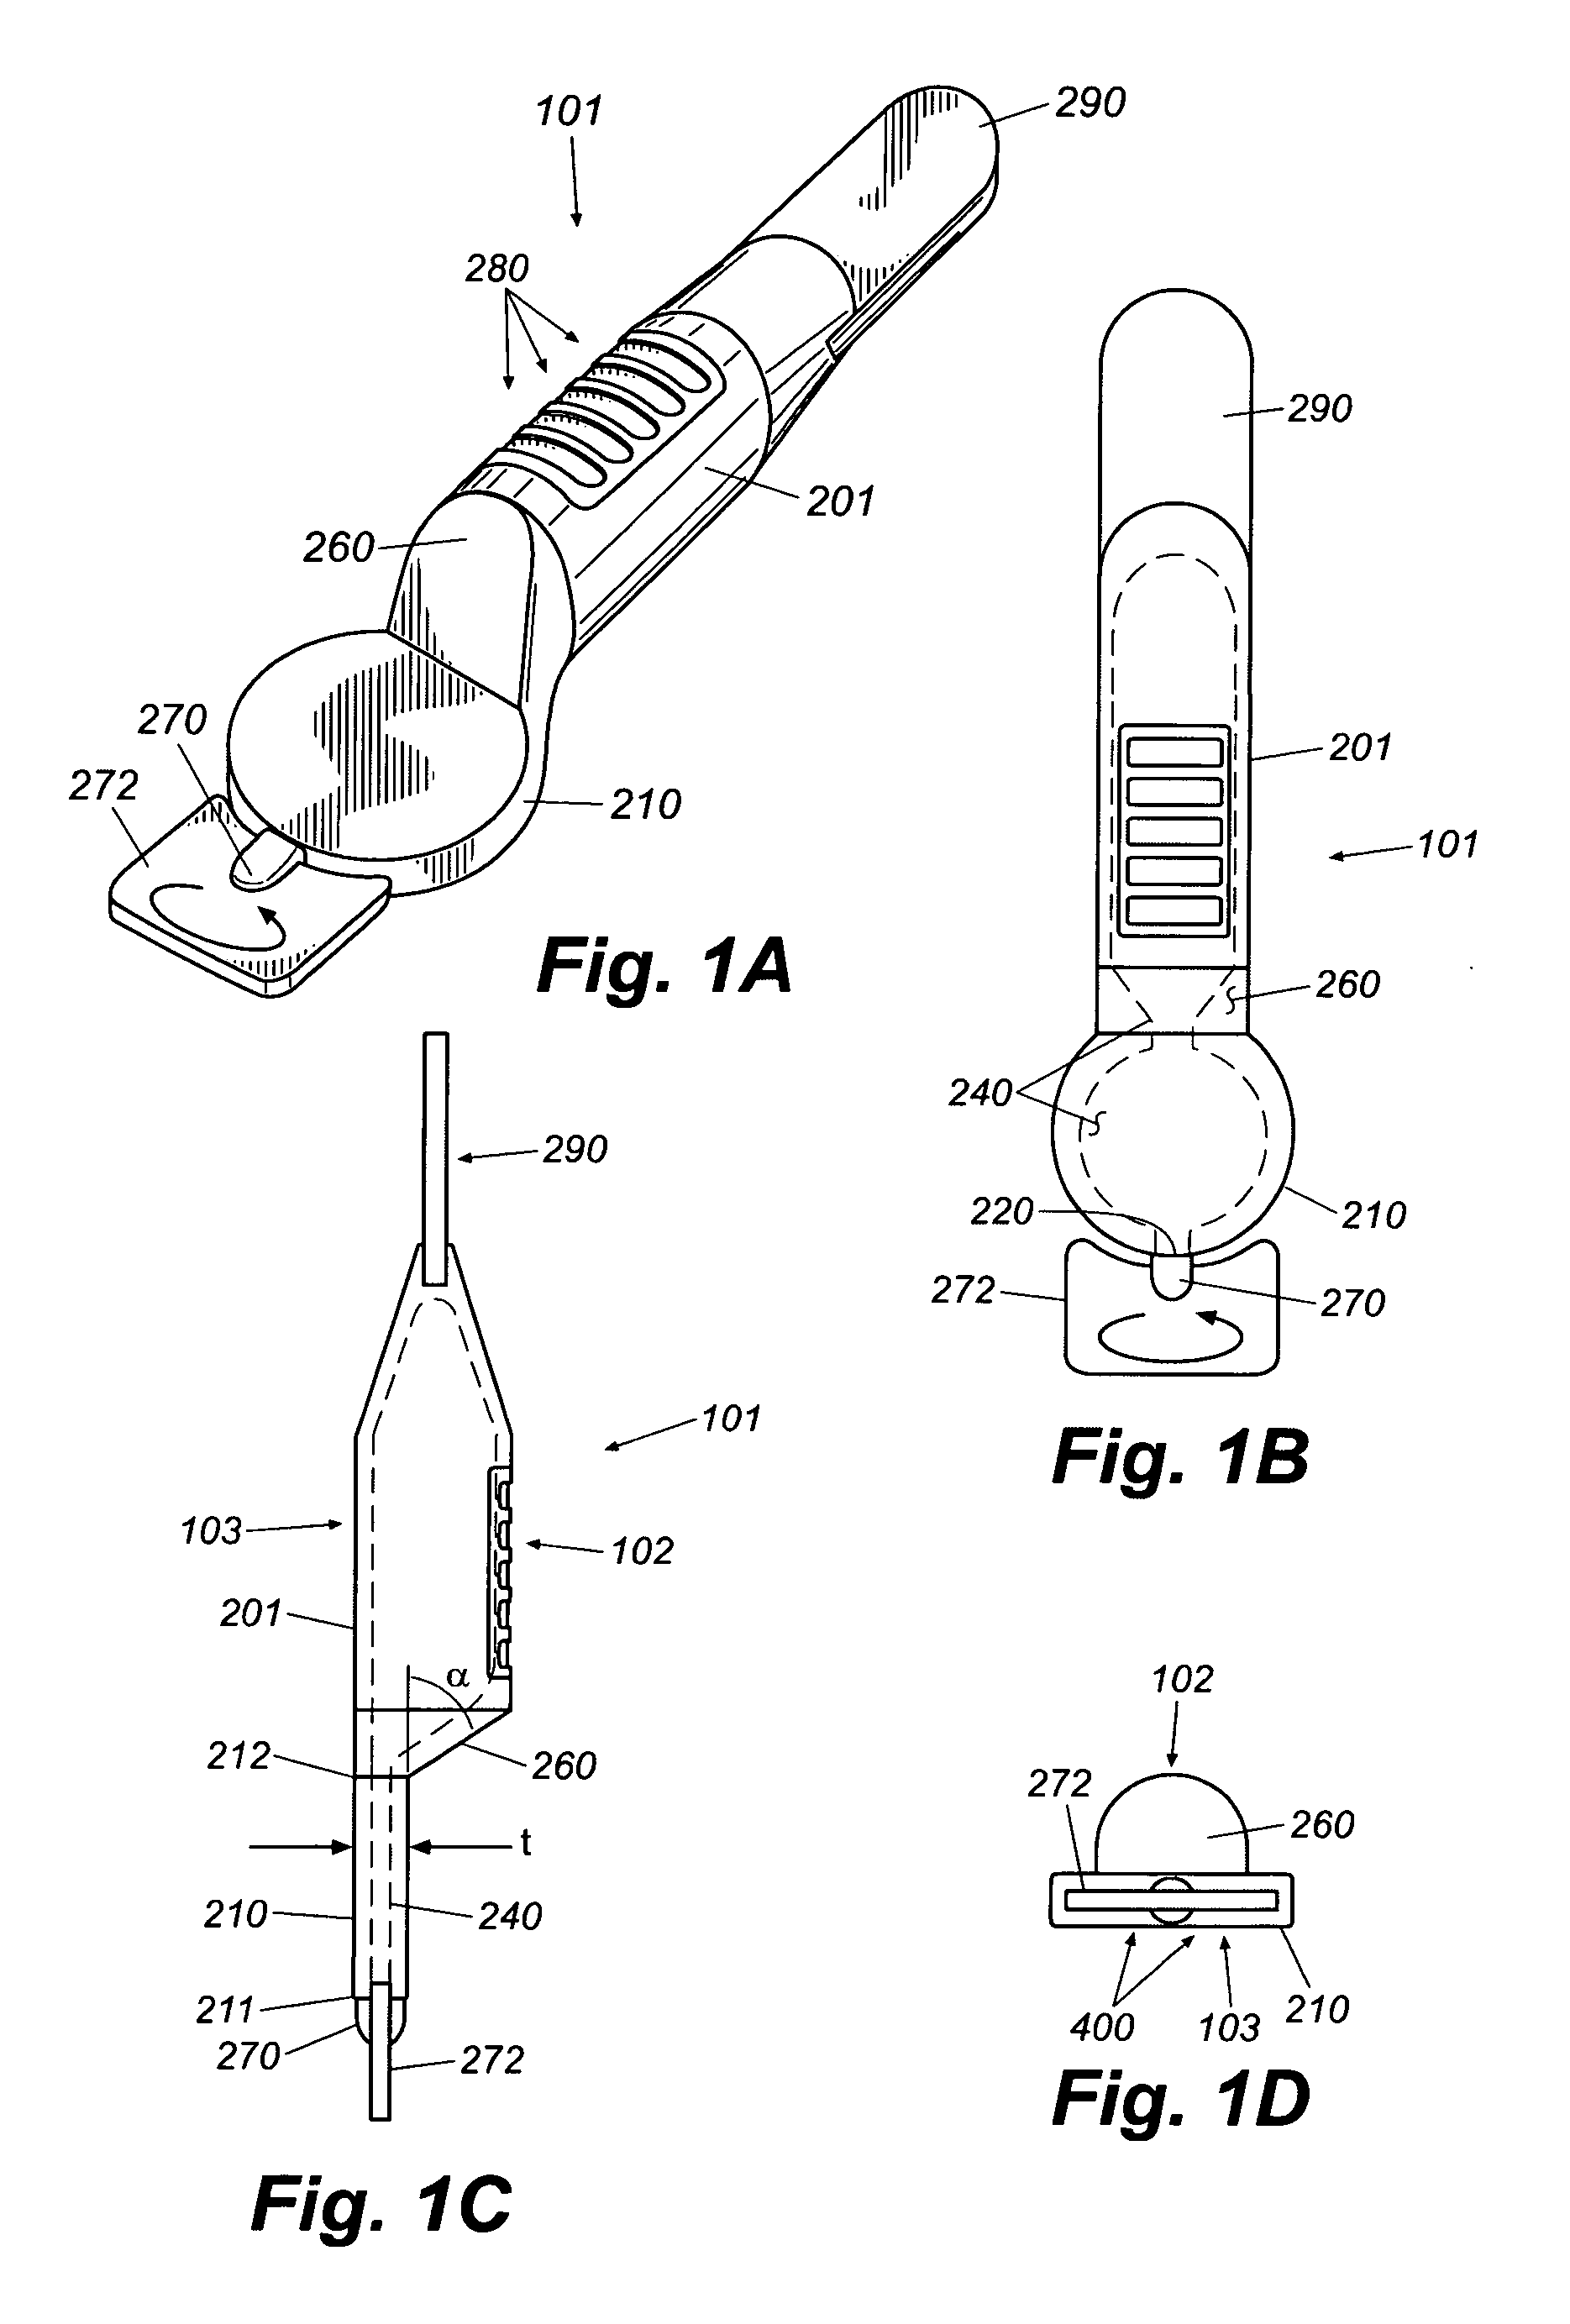 Dispensing container with flow control system